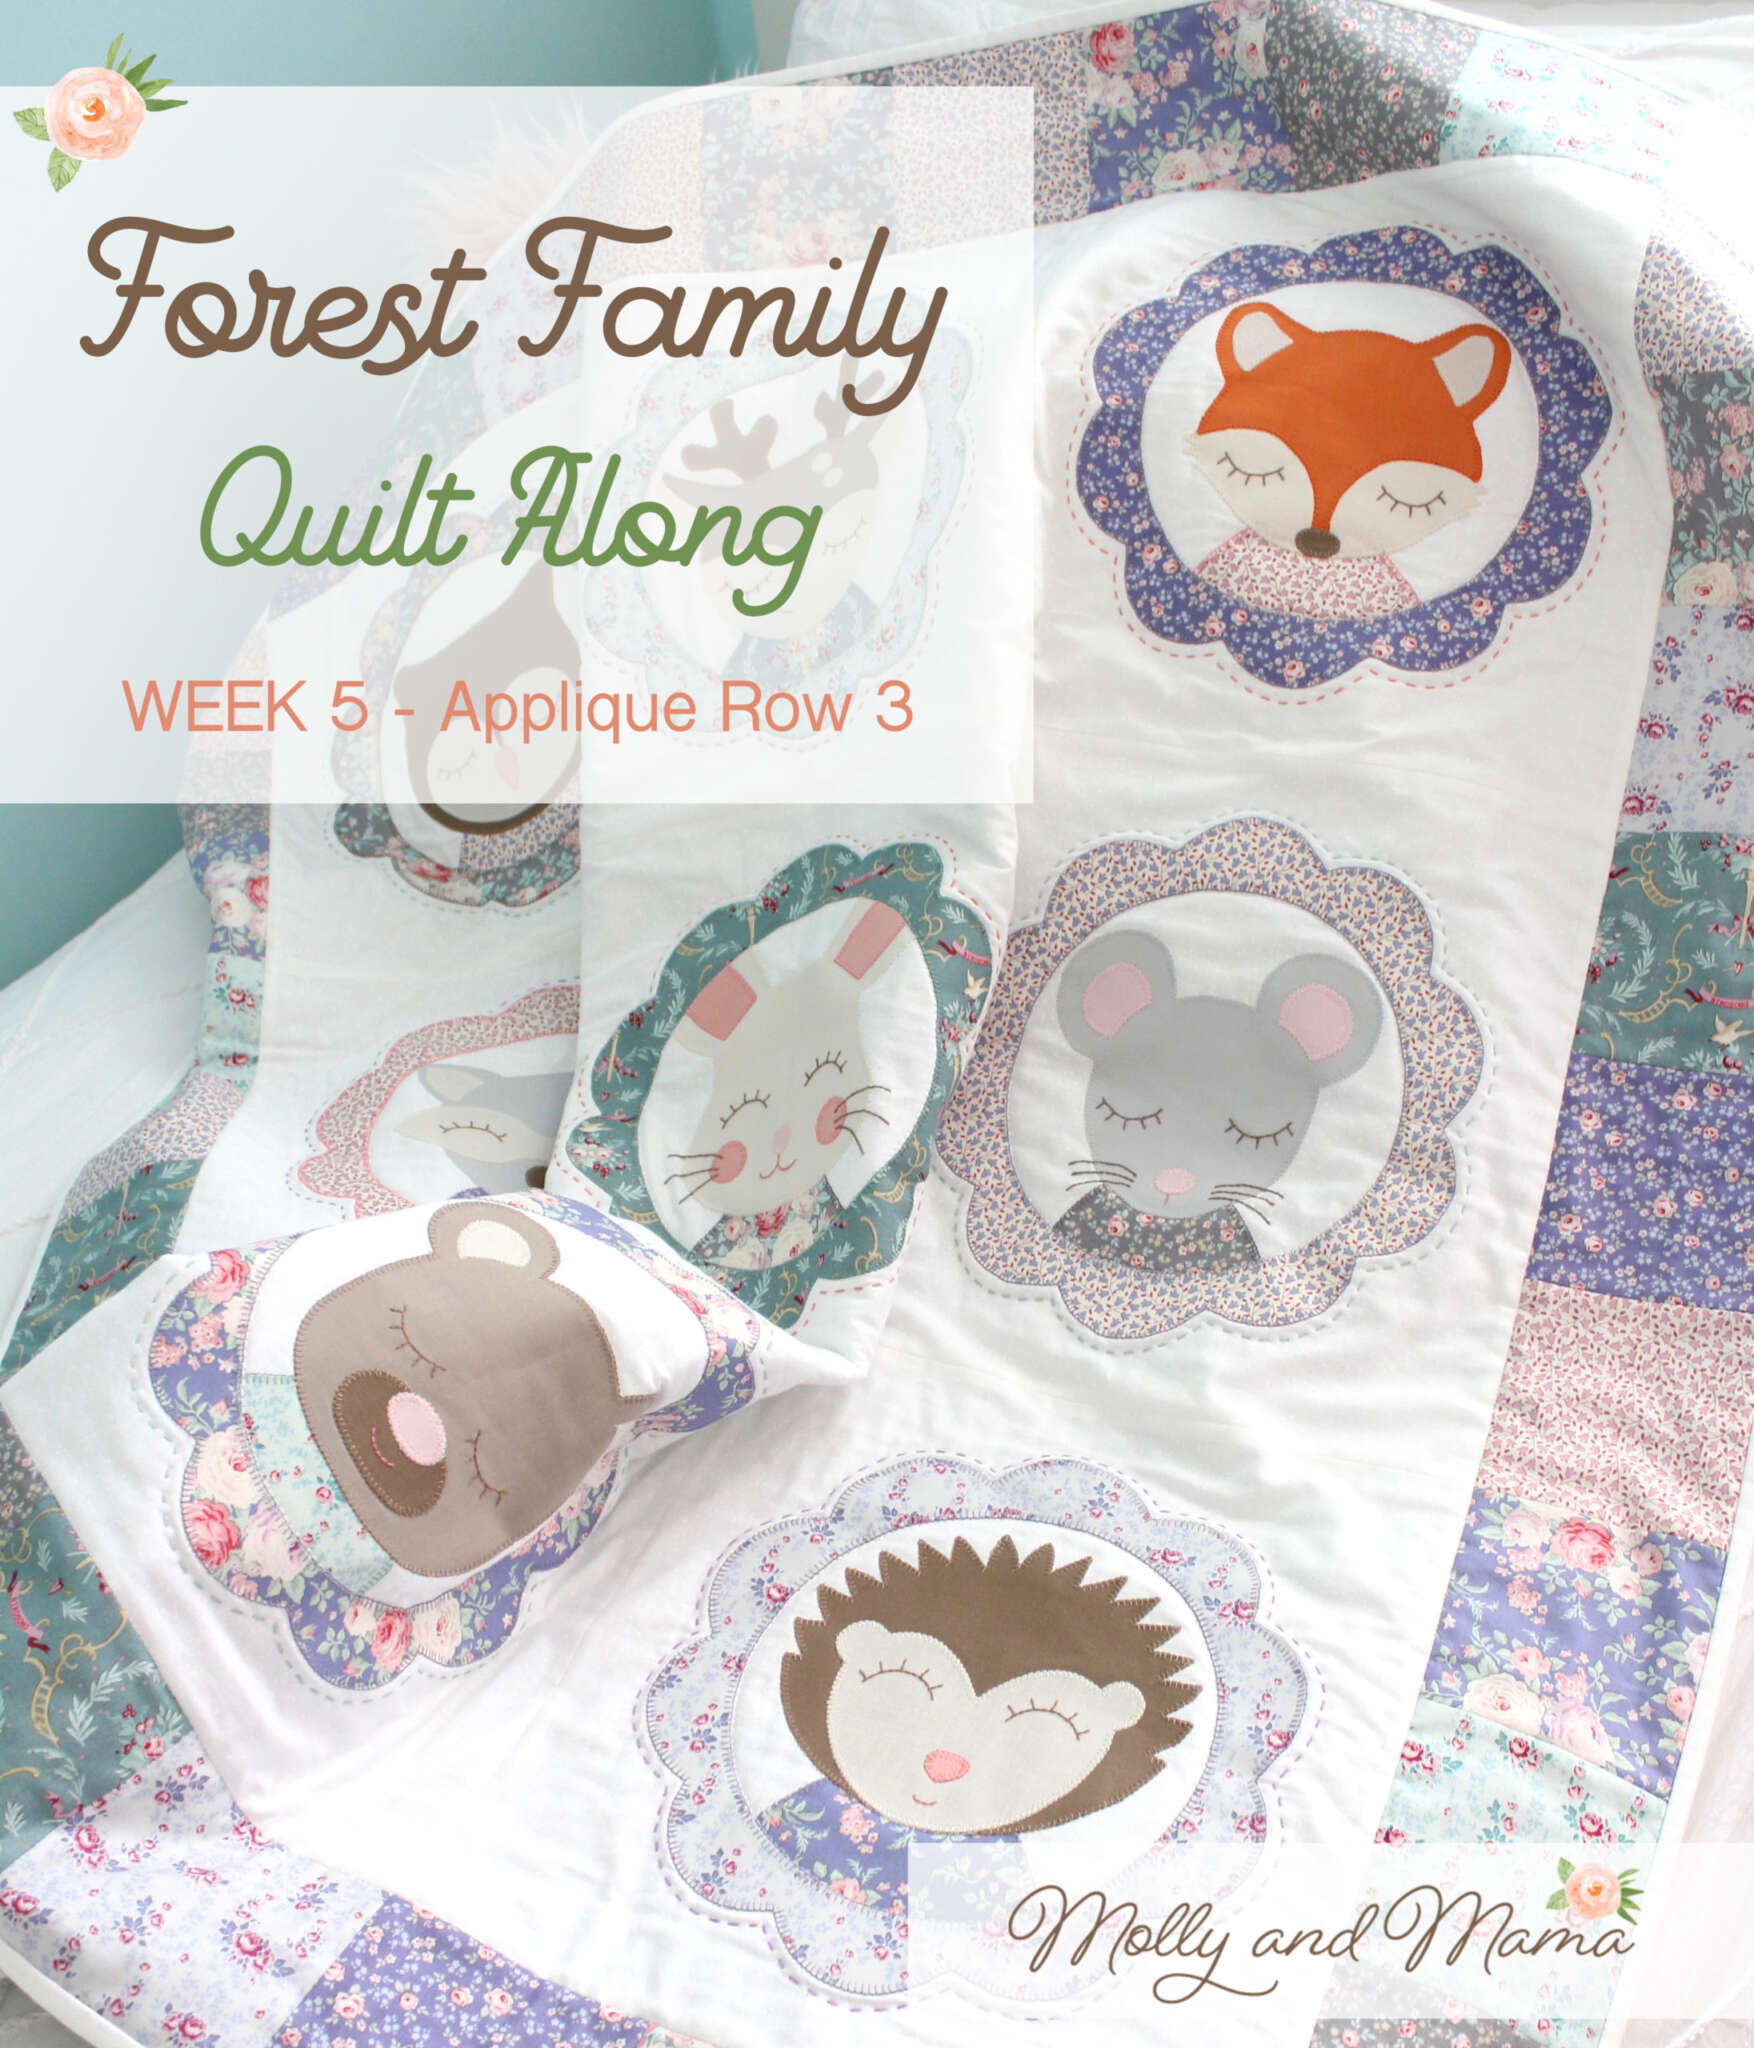 Week 5 – Forest Family Quilt Along